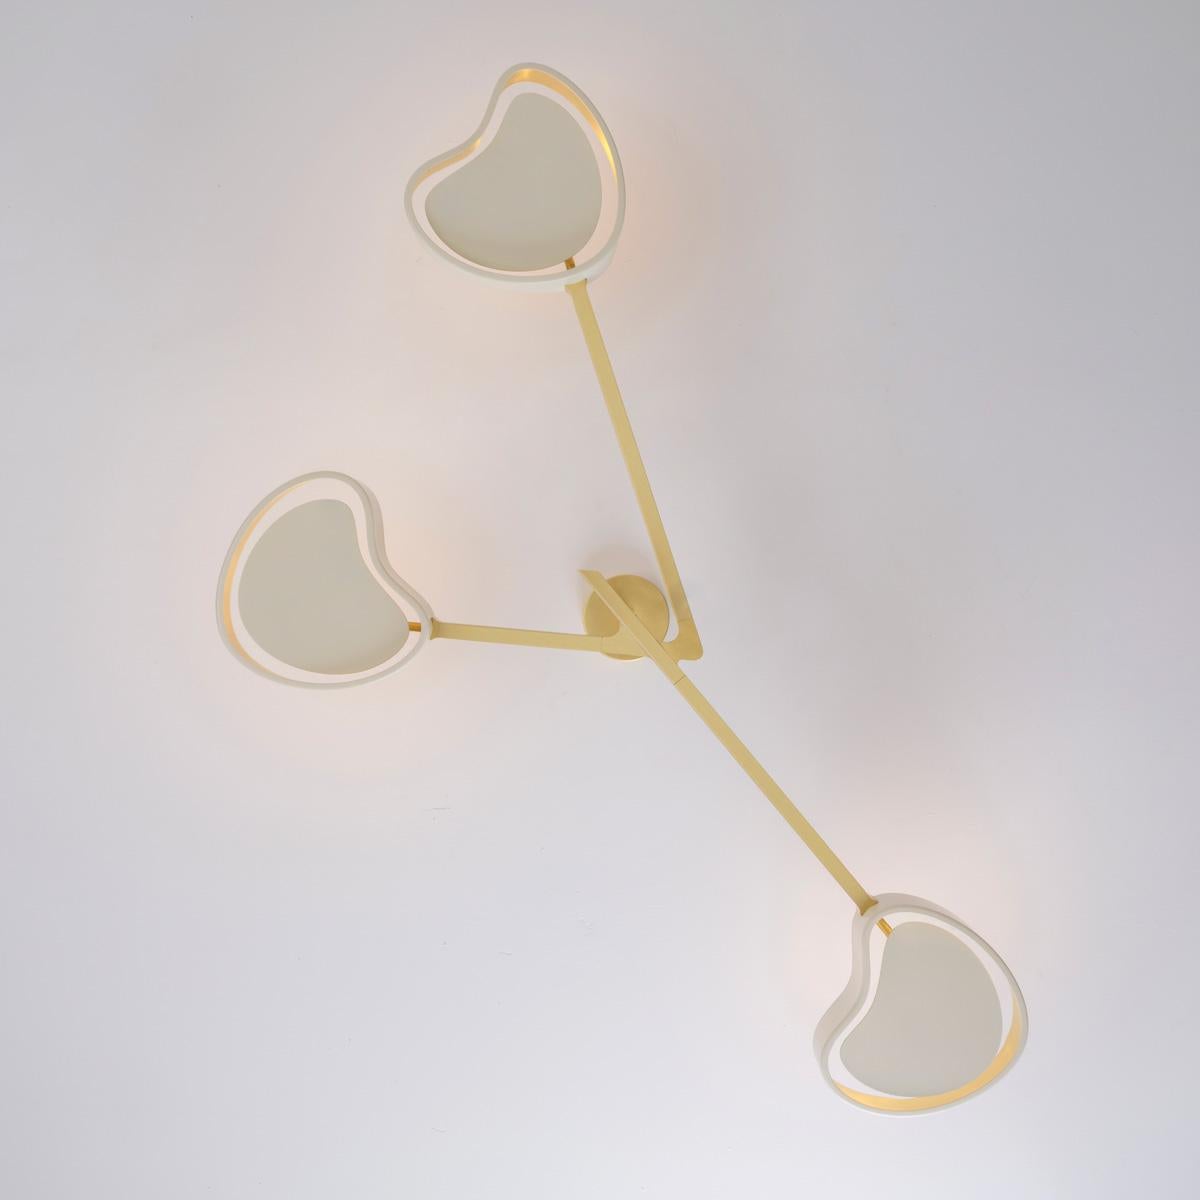 Cuore N.3 Ceiling Light by Gaspare Asaro. Bronze Finish For Sale 6